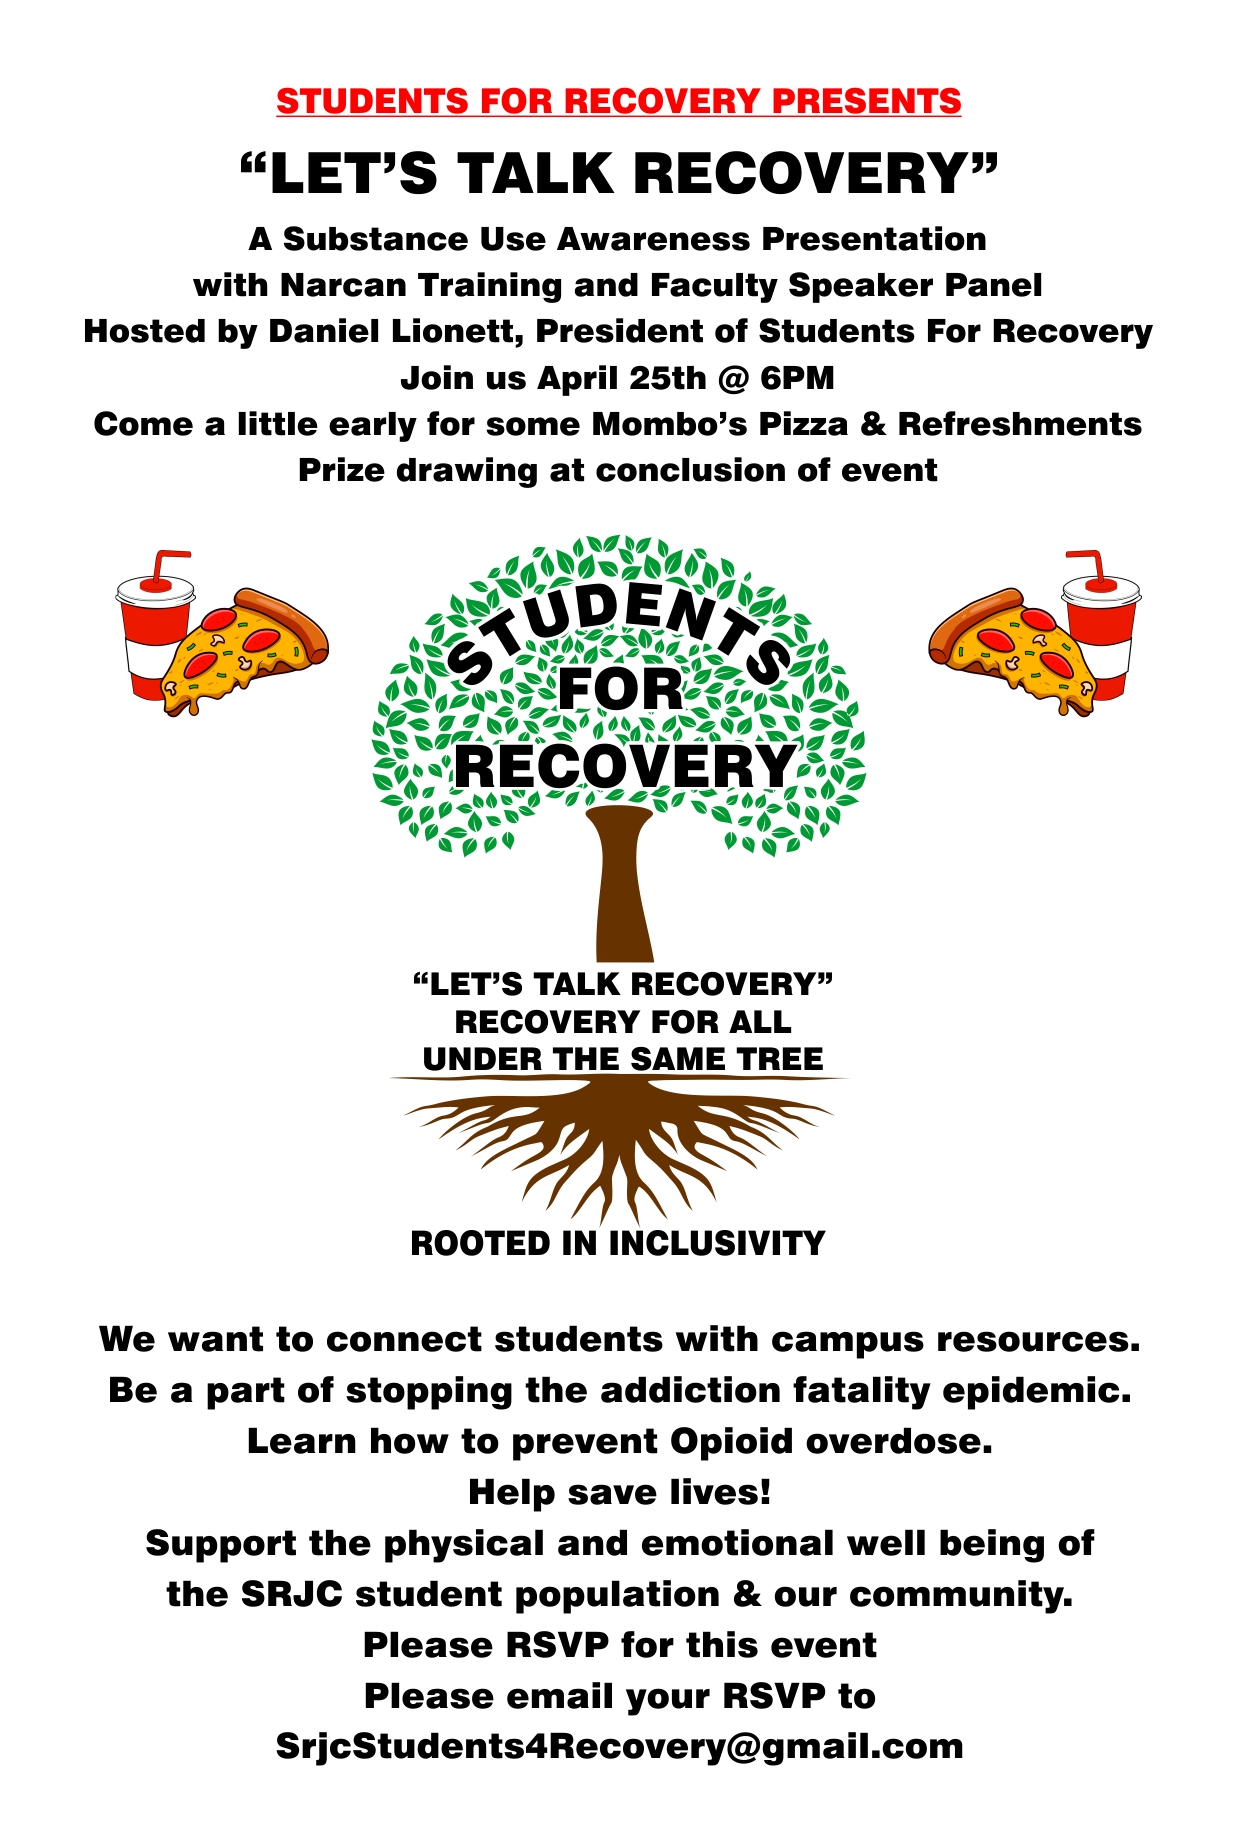 Let's Talk Recovery - a substance use awareness presentation with narcan training and faculty speaker panel. hosted by daniel lionett, students for recovery president. join us April 25th at 6 PM at Mombo's pizza and refreshments. prize drawing will take place at the conclusion of the event. see you there!! RSVP at srjcstudents4recovery@gmail.com